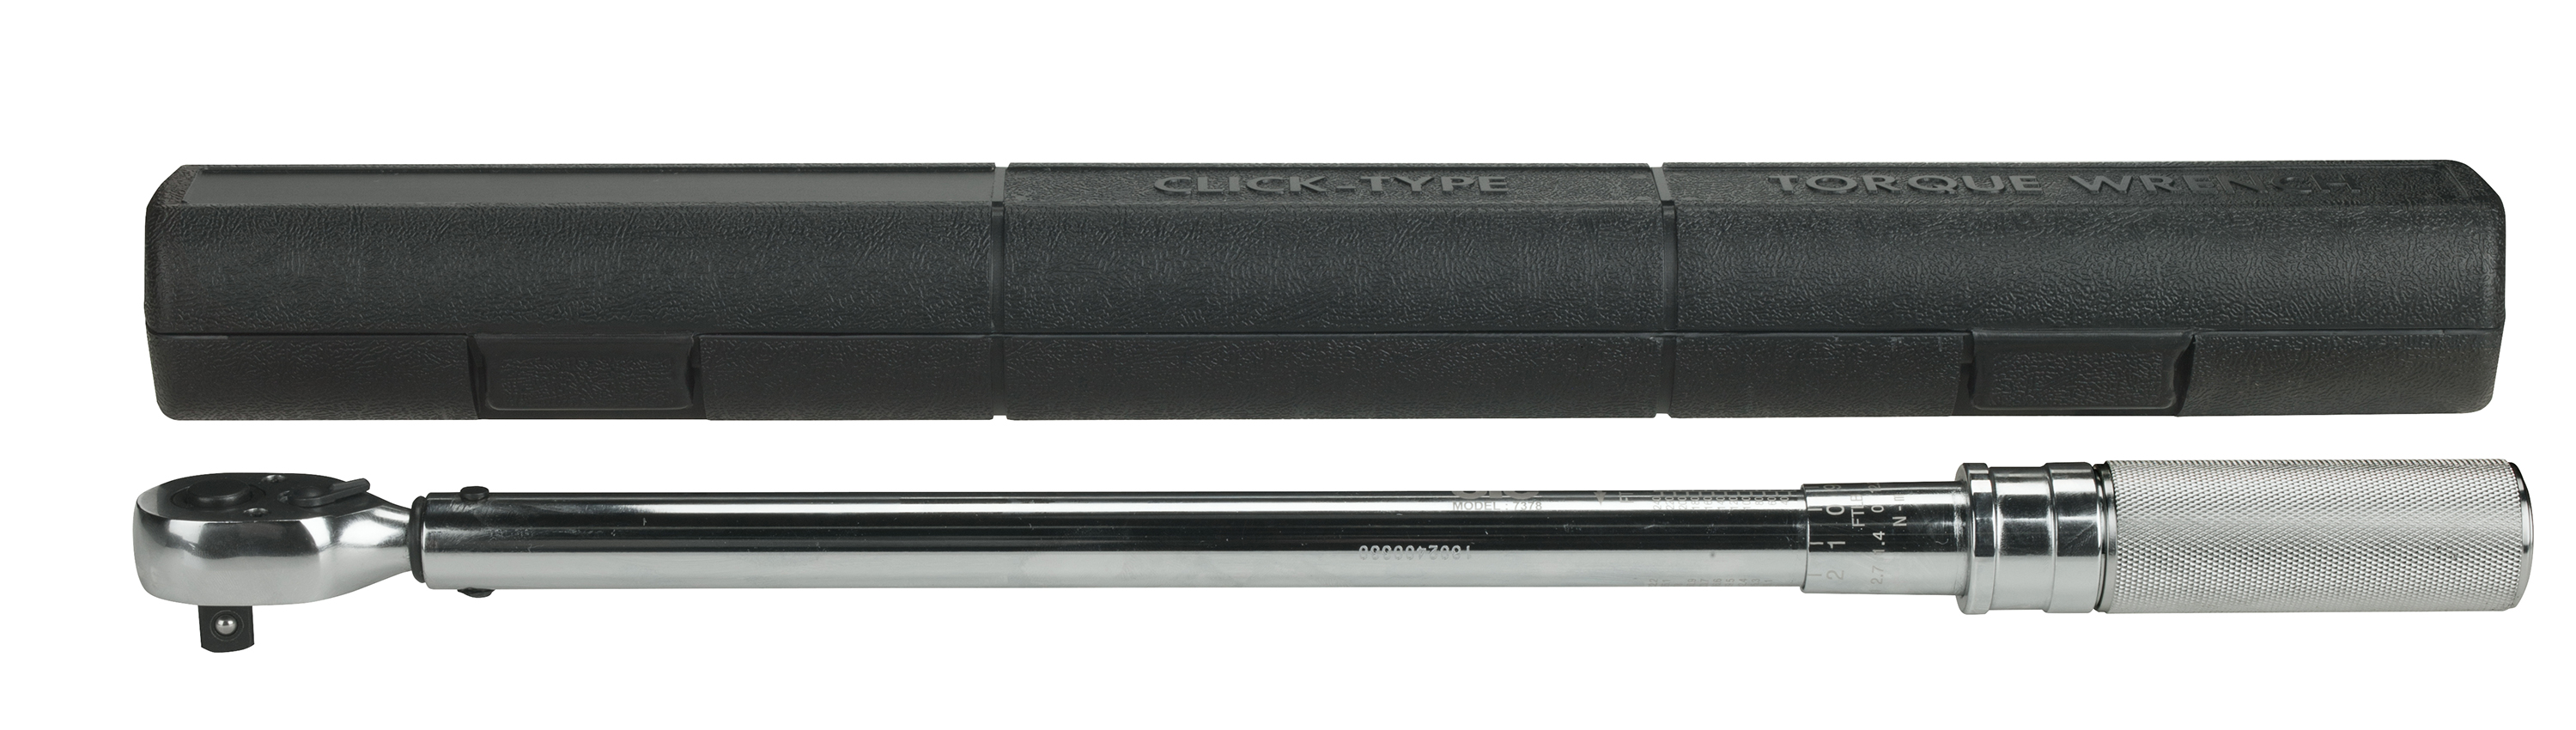 Accutorq™ Clikker 1/2 Torque Wrench, 25-250 ft. lbs.